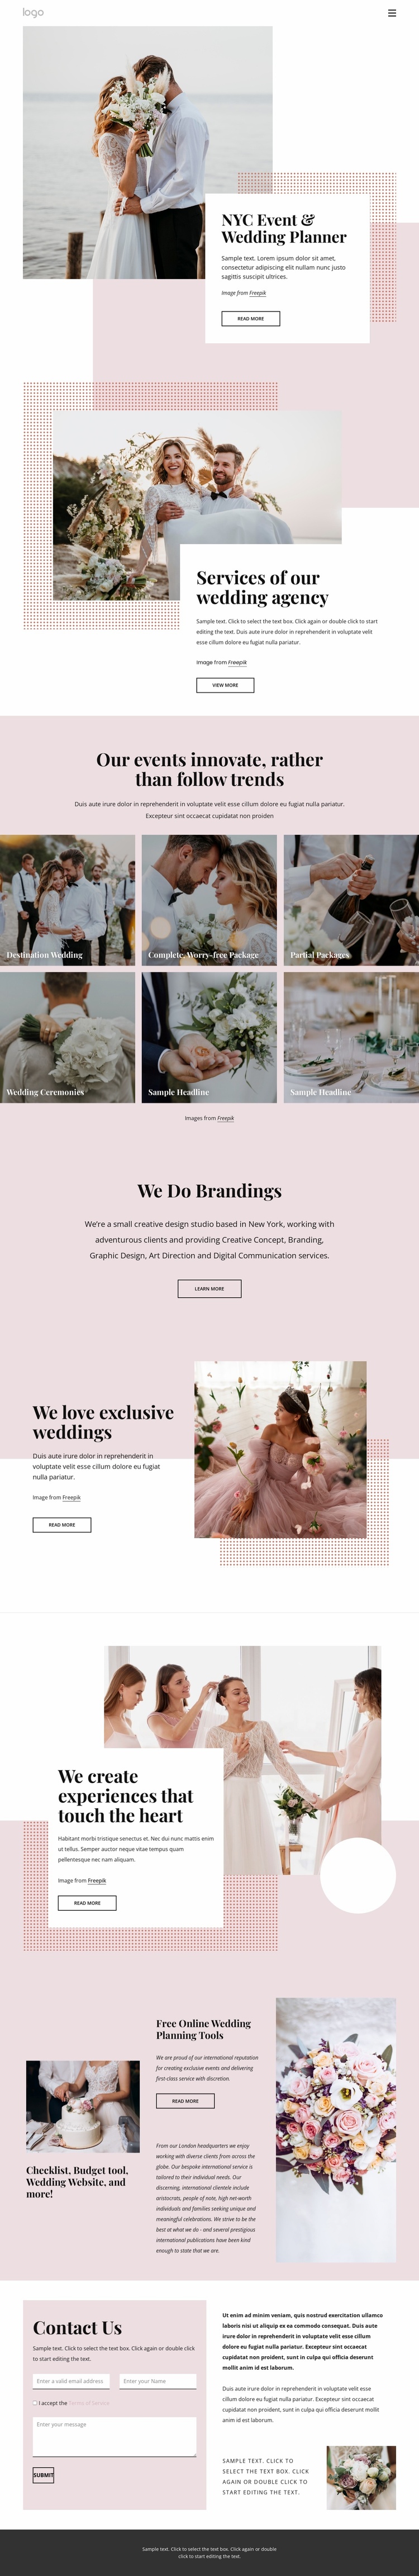 We create stress-free planning experience eCommerce Template